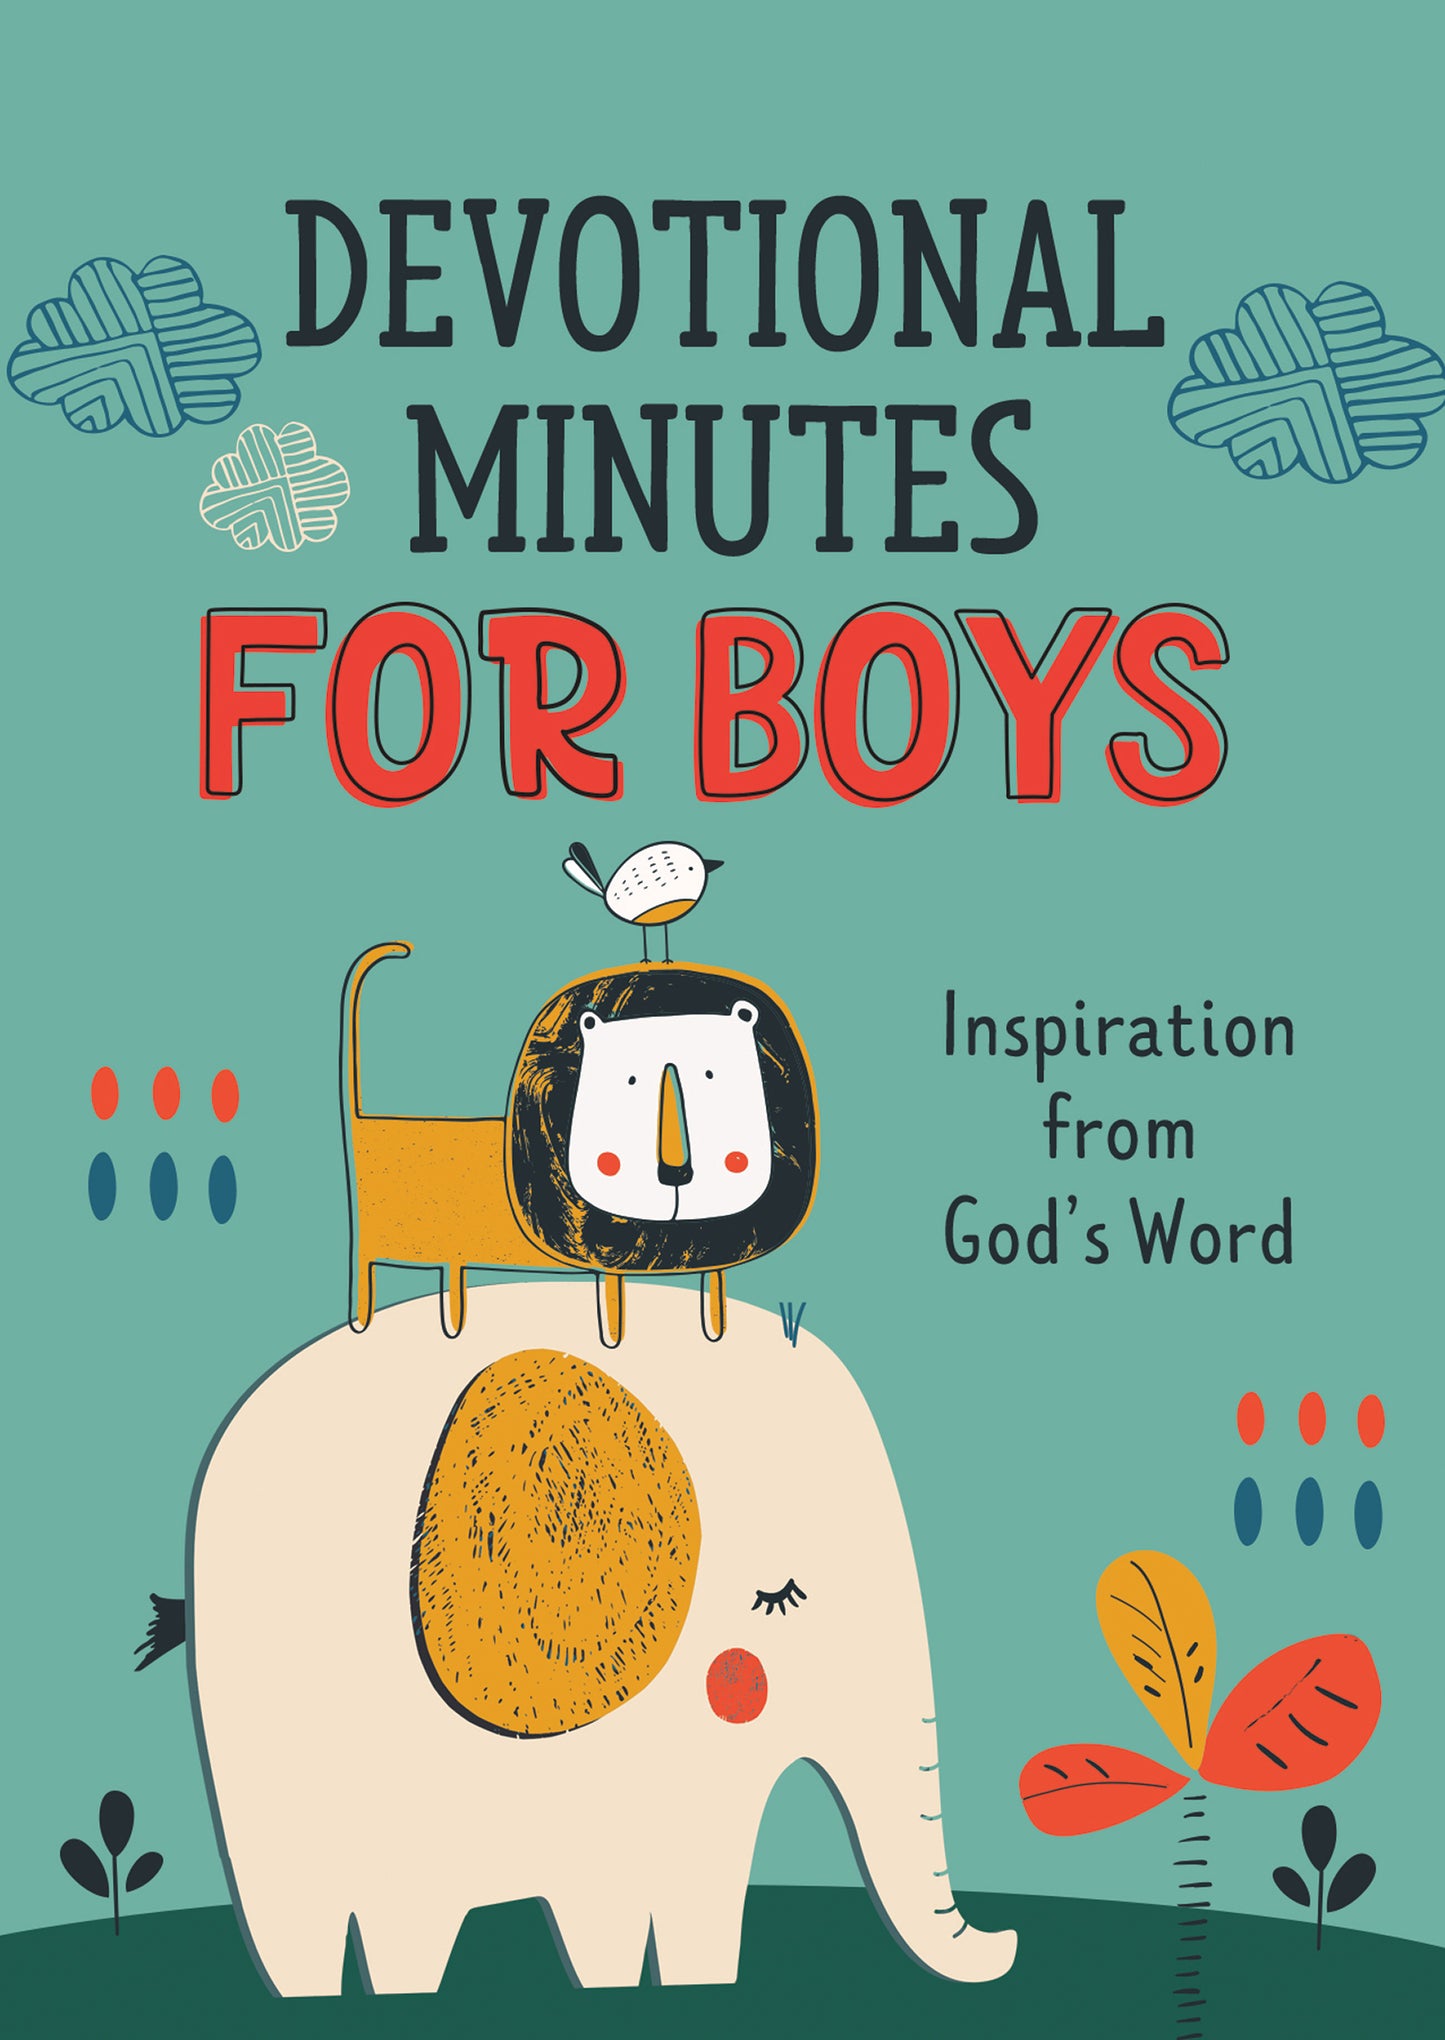 Devotional Minutes for Boys - The Christian Gift Company